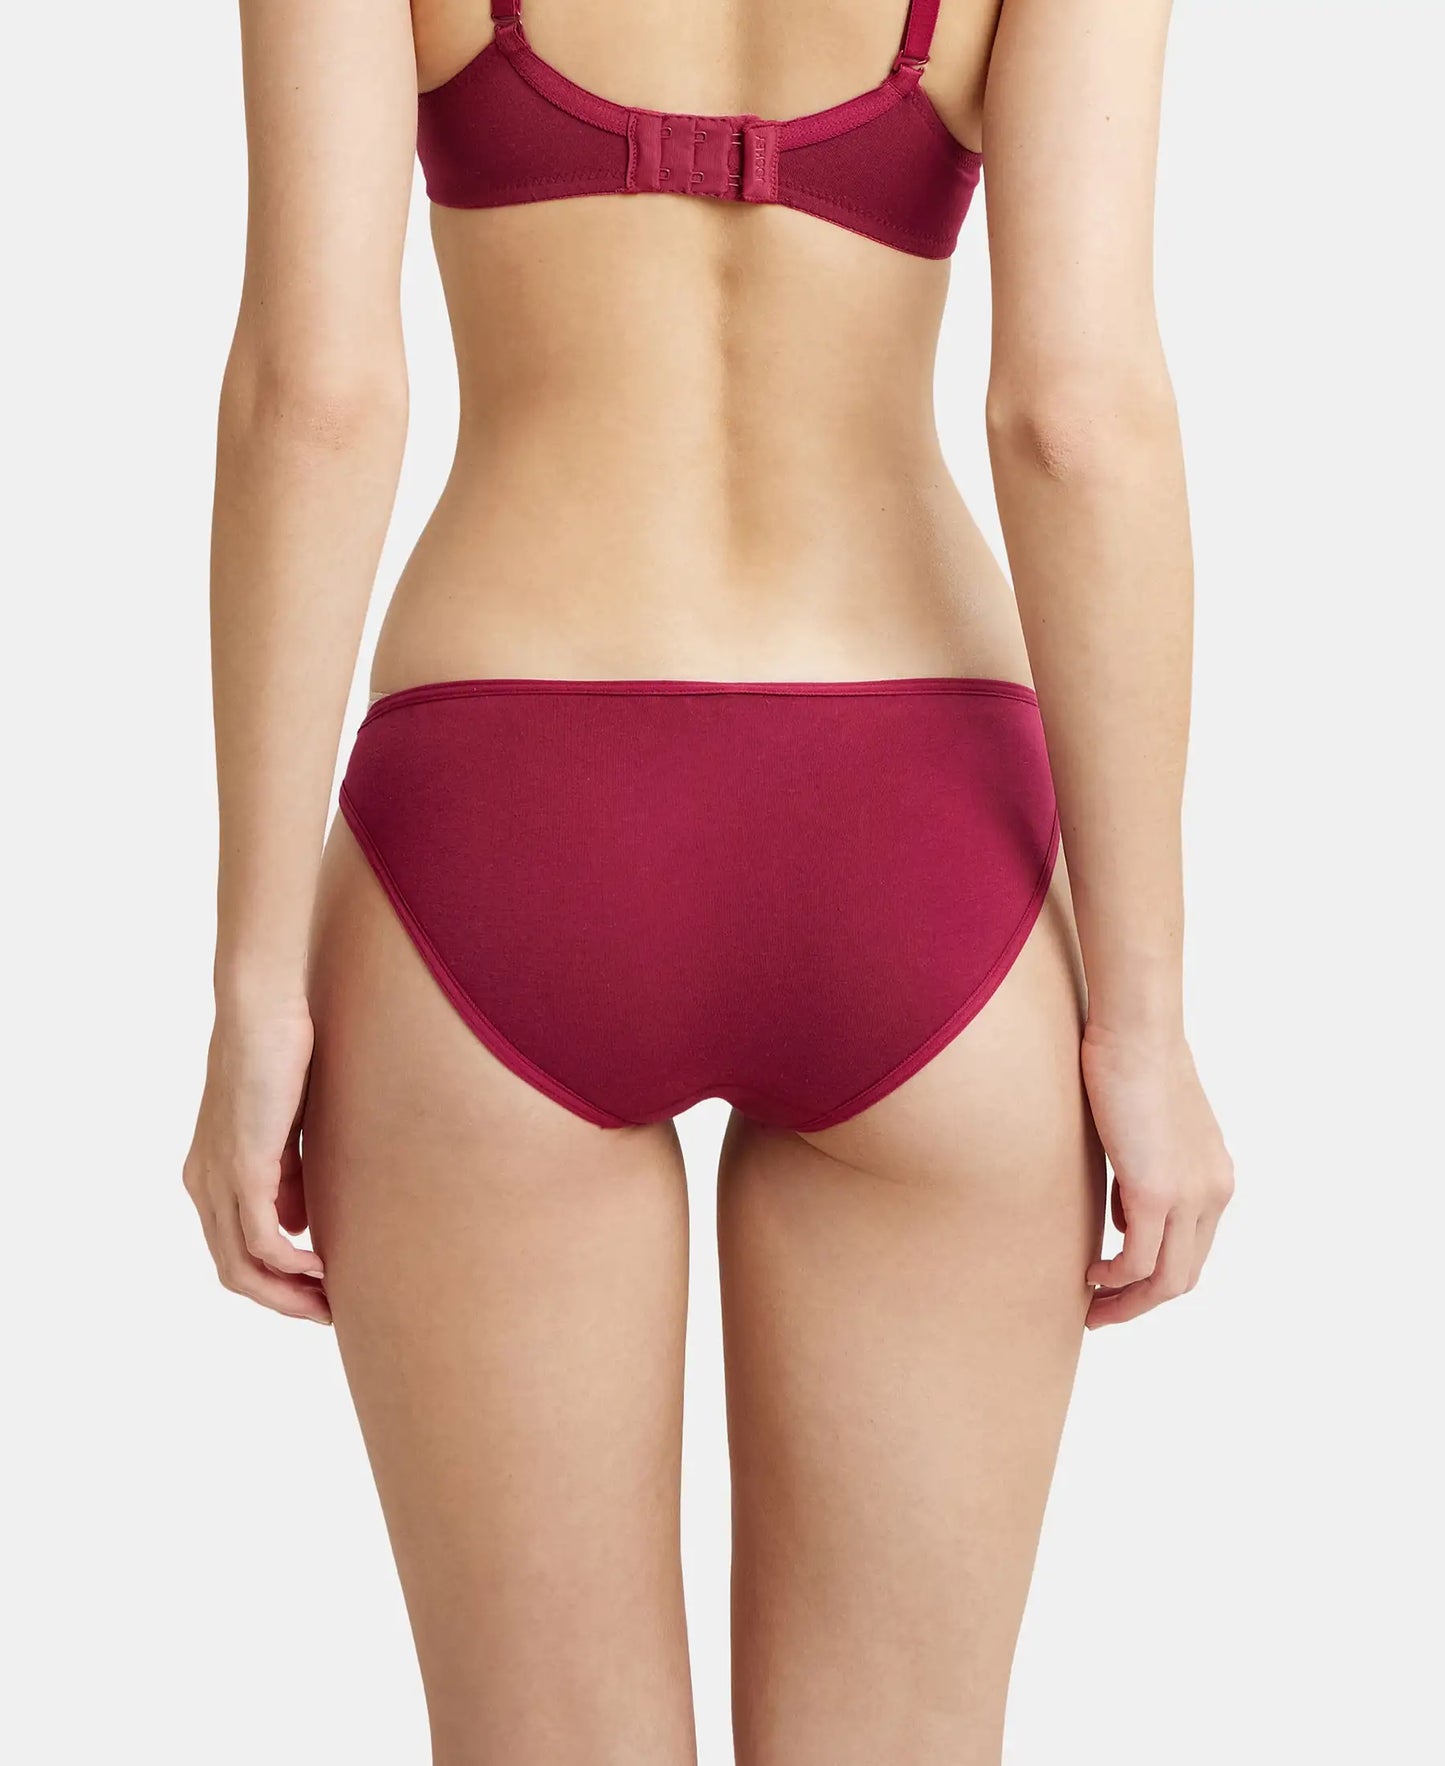 Super Combed Cotton Elastane Low Waist Bikini With Concealed Waistband and StayFresh Treatment - Beet Red-3